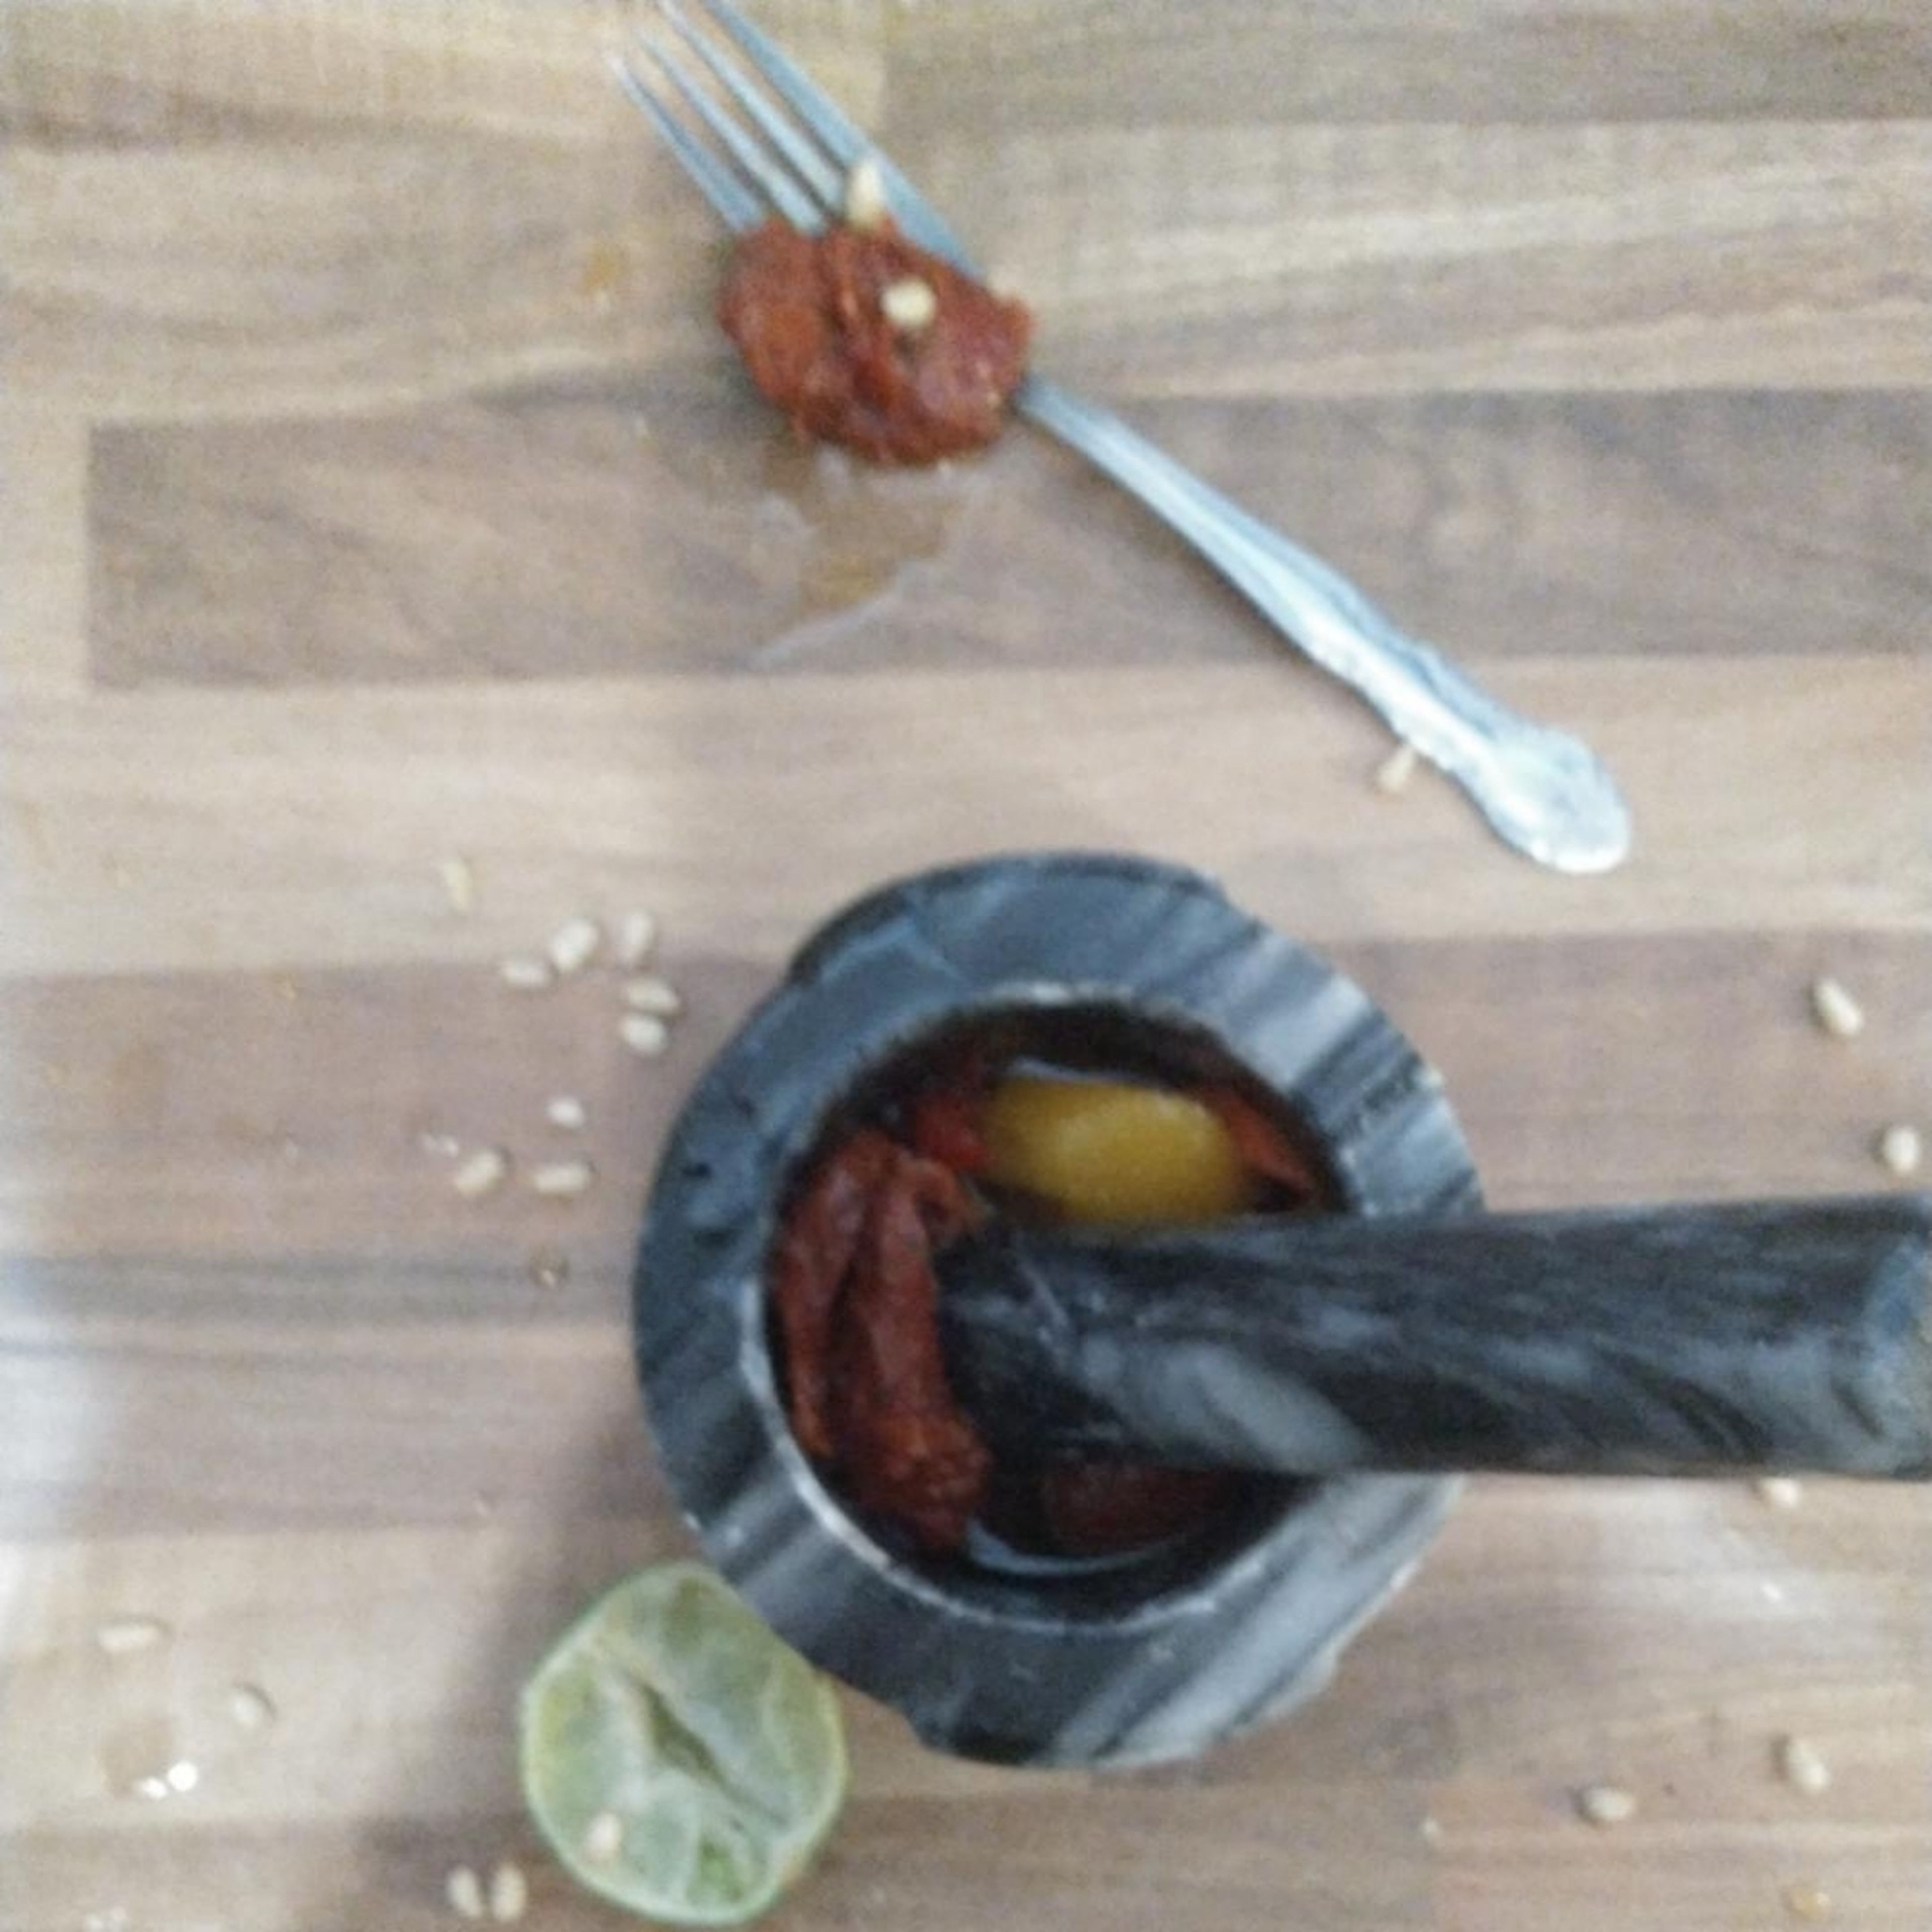 In a pestle and mortar, bash/grind the roasted red peppers and sun-dried tomatoes along with 2tbsp or so of the oil they come in (oil from either the peppers or tomatoes, or both, is fine). Squeeze in the lime juice and mix.